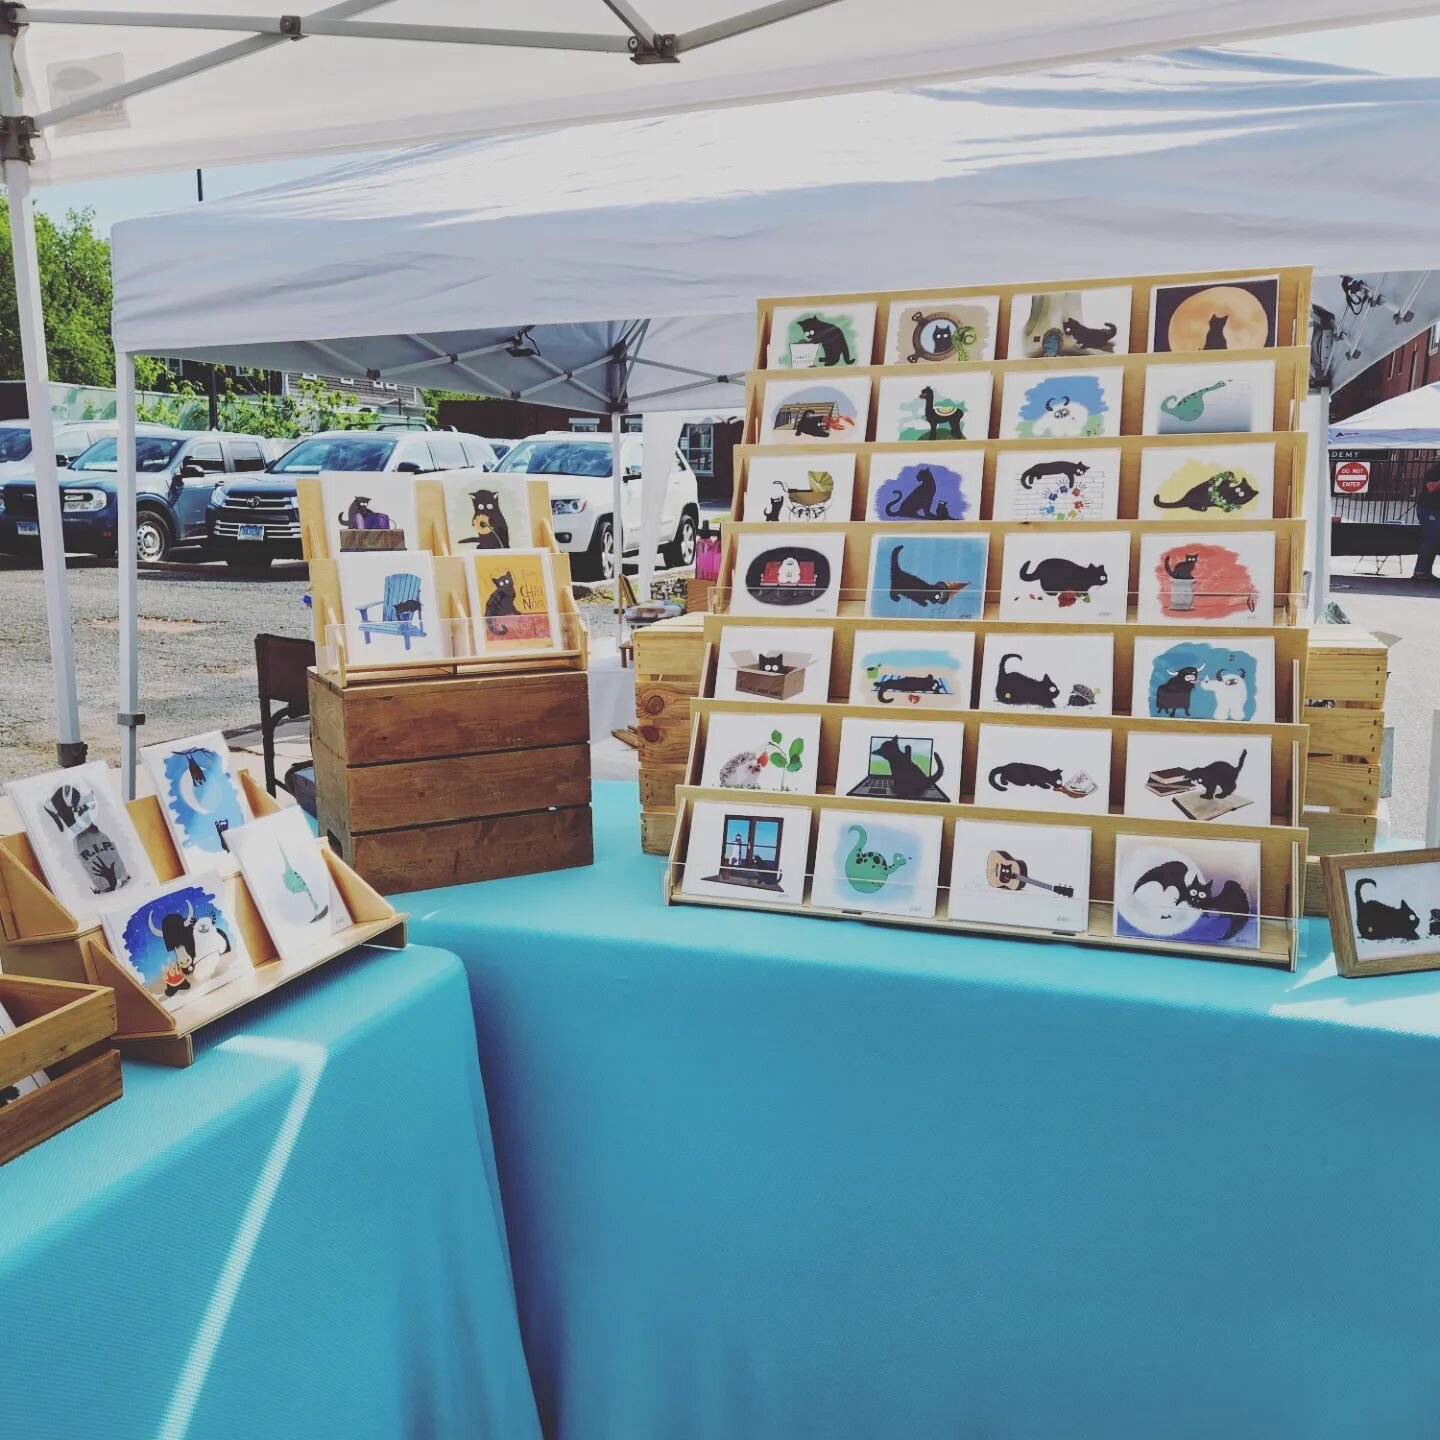 It's craft fair day! We are all set up at @themarket1115 until 4pm along with a bunch of amazing artists. The weather is beautiful, the breeze is perfect. Swipe to see our new display and stickers!
.
.
.
#fallenpeachlane #greetingcard #craftfair #cta